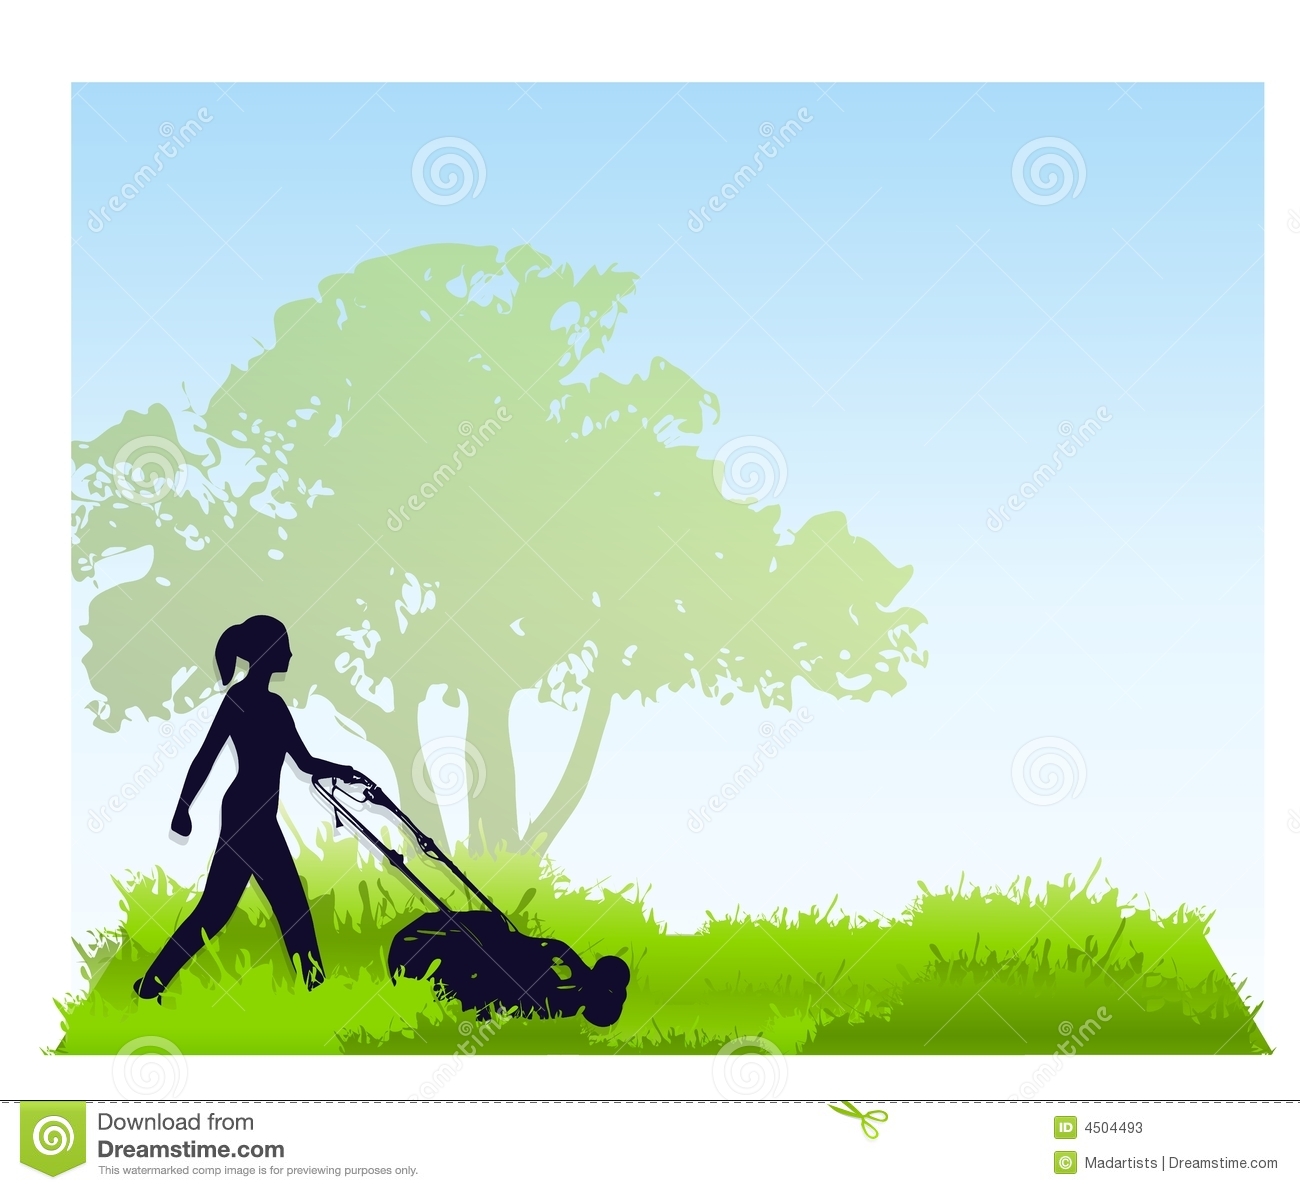 An Illustration Featuring A Woman Mowing The Lawn With Green Grass And